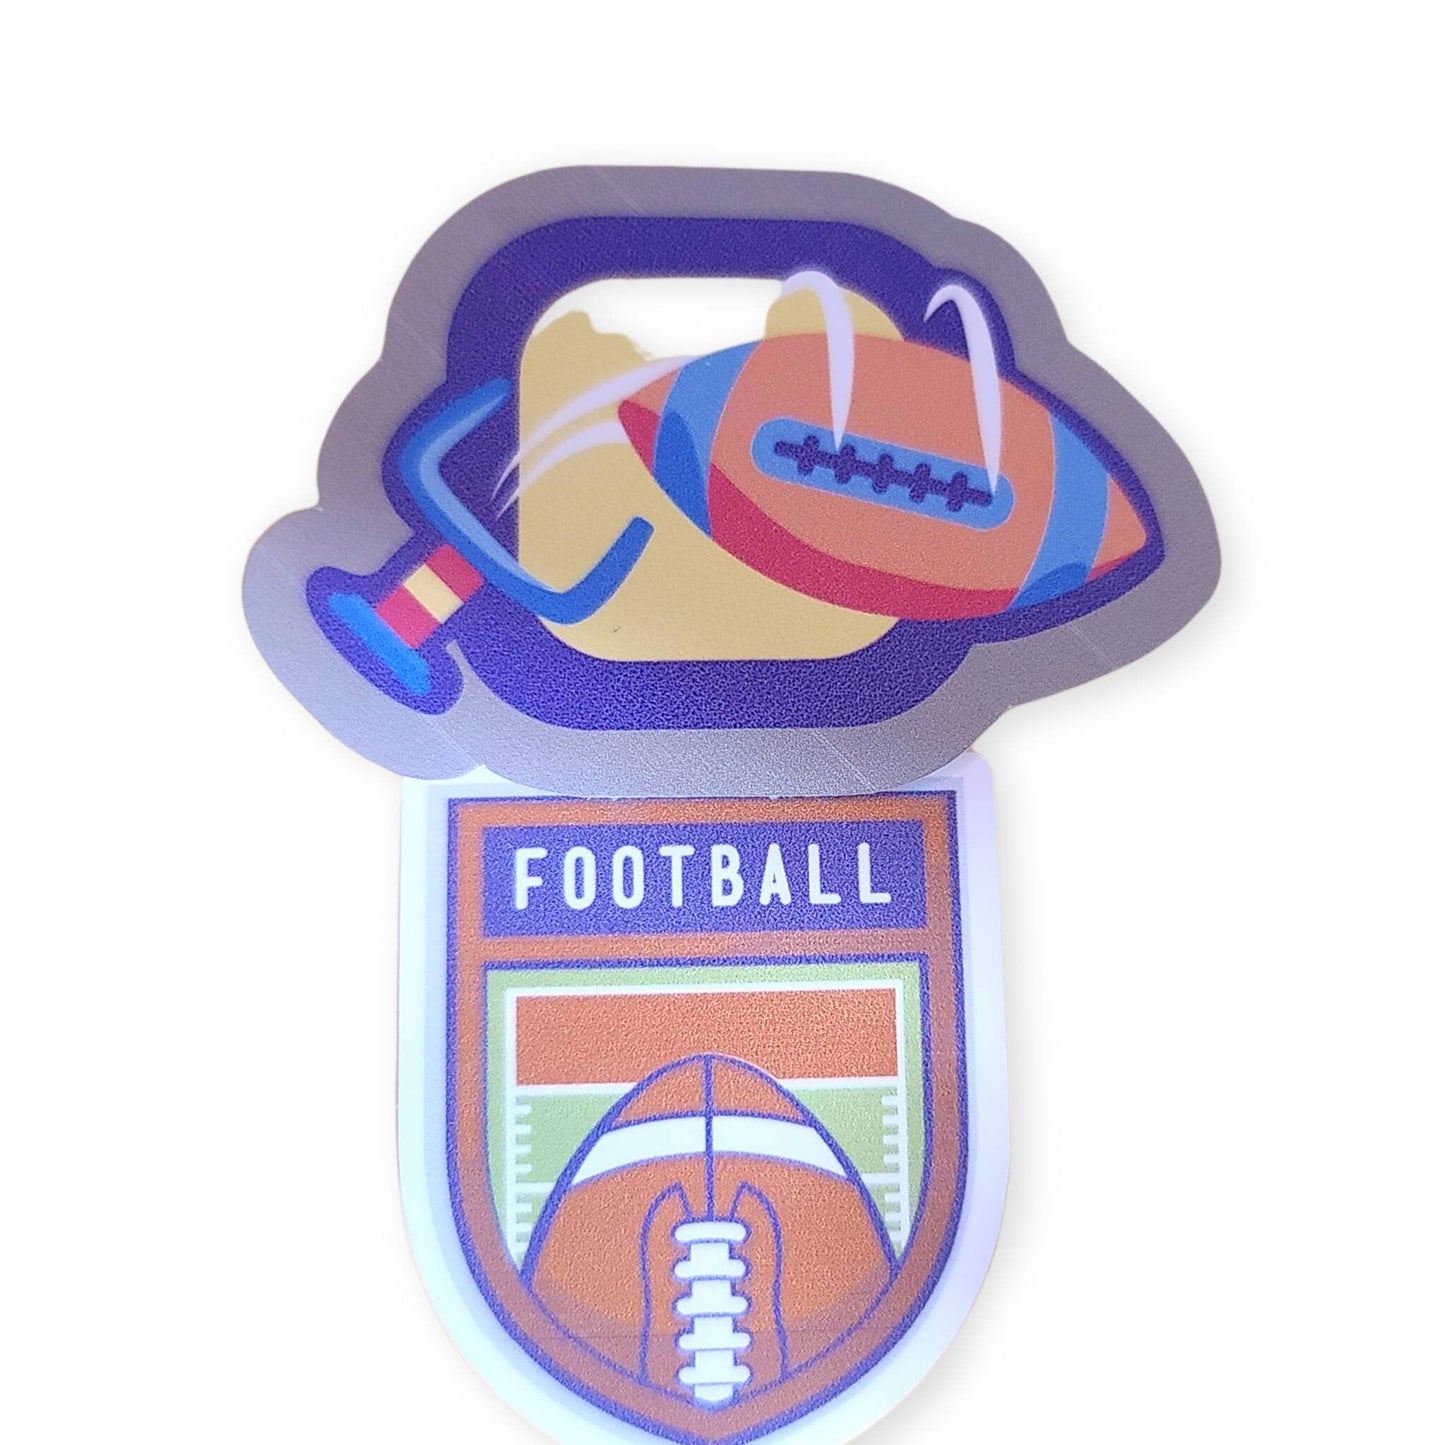 Stickers, Football, Water Bottle, large stickers, Sticker pack, Sticker set, Sports, Sport sticker, Football lovers, stocking stuffer, decal